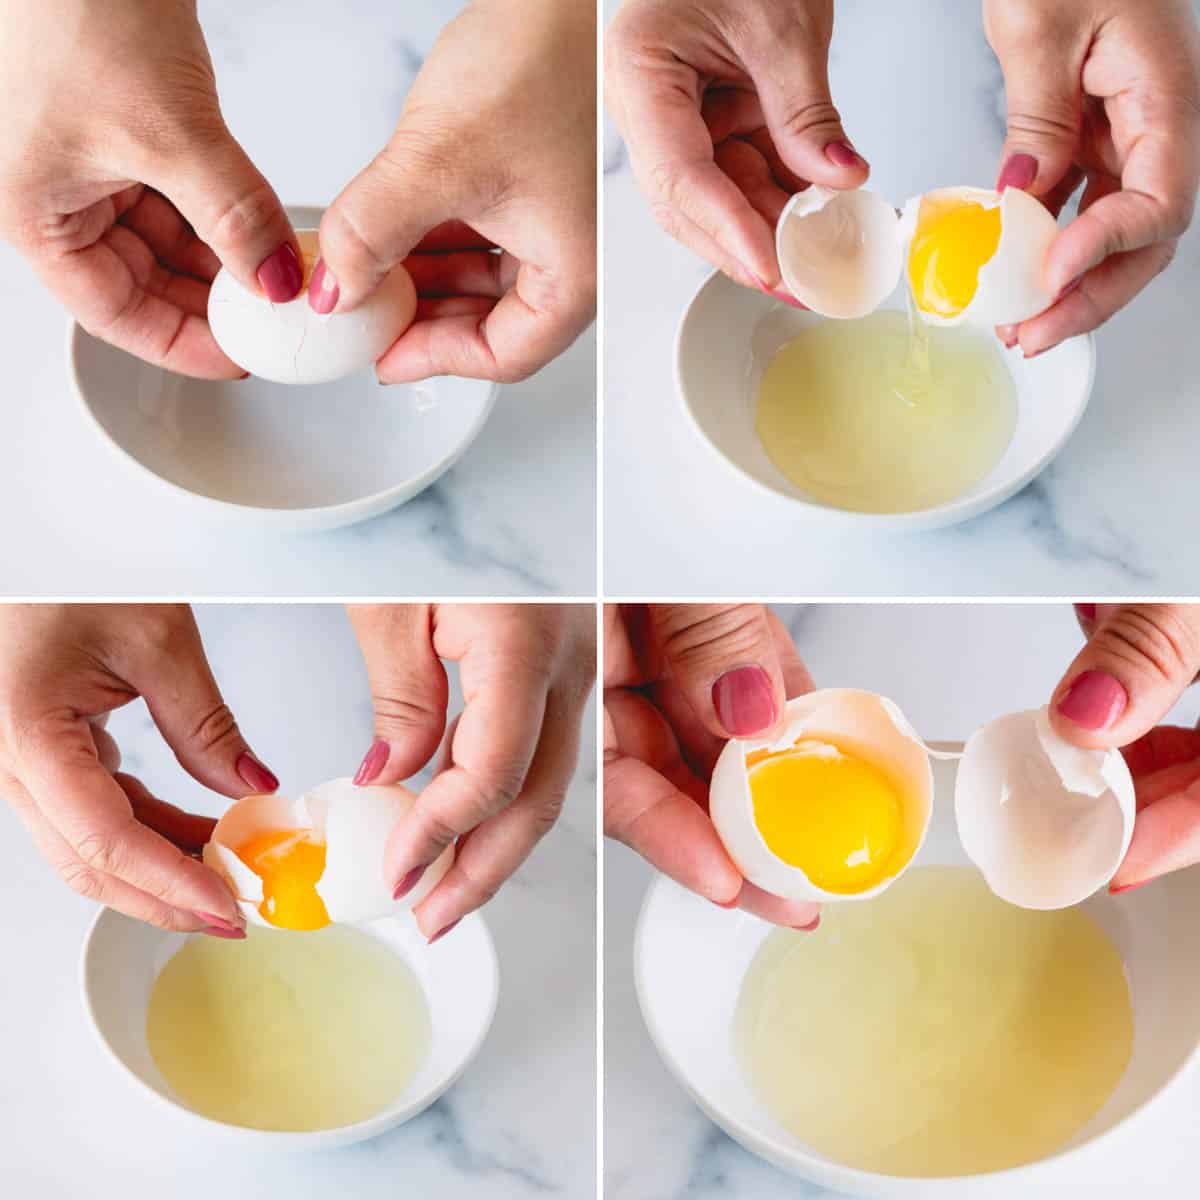 4 step by step images of separting egg yolk from the egg whites.